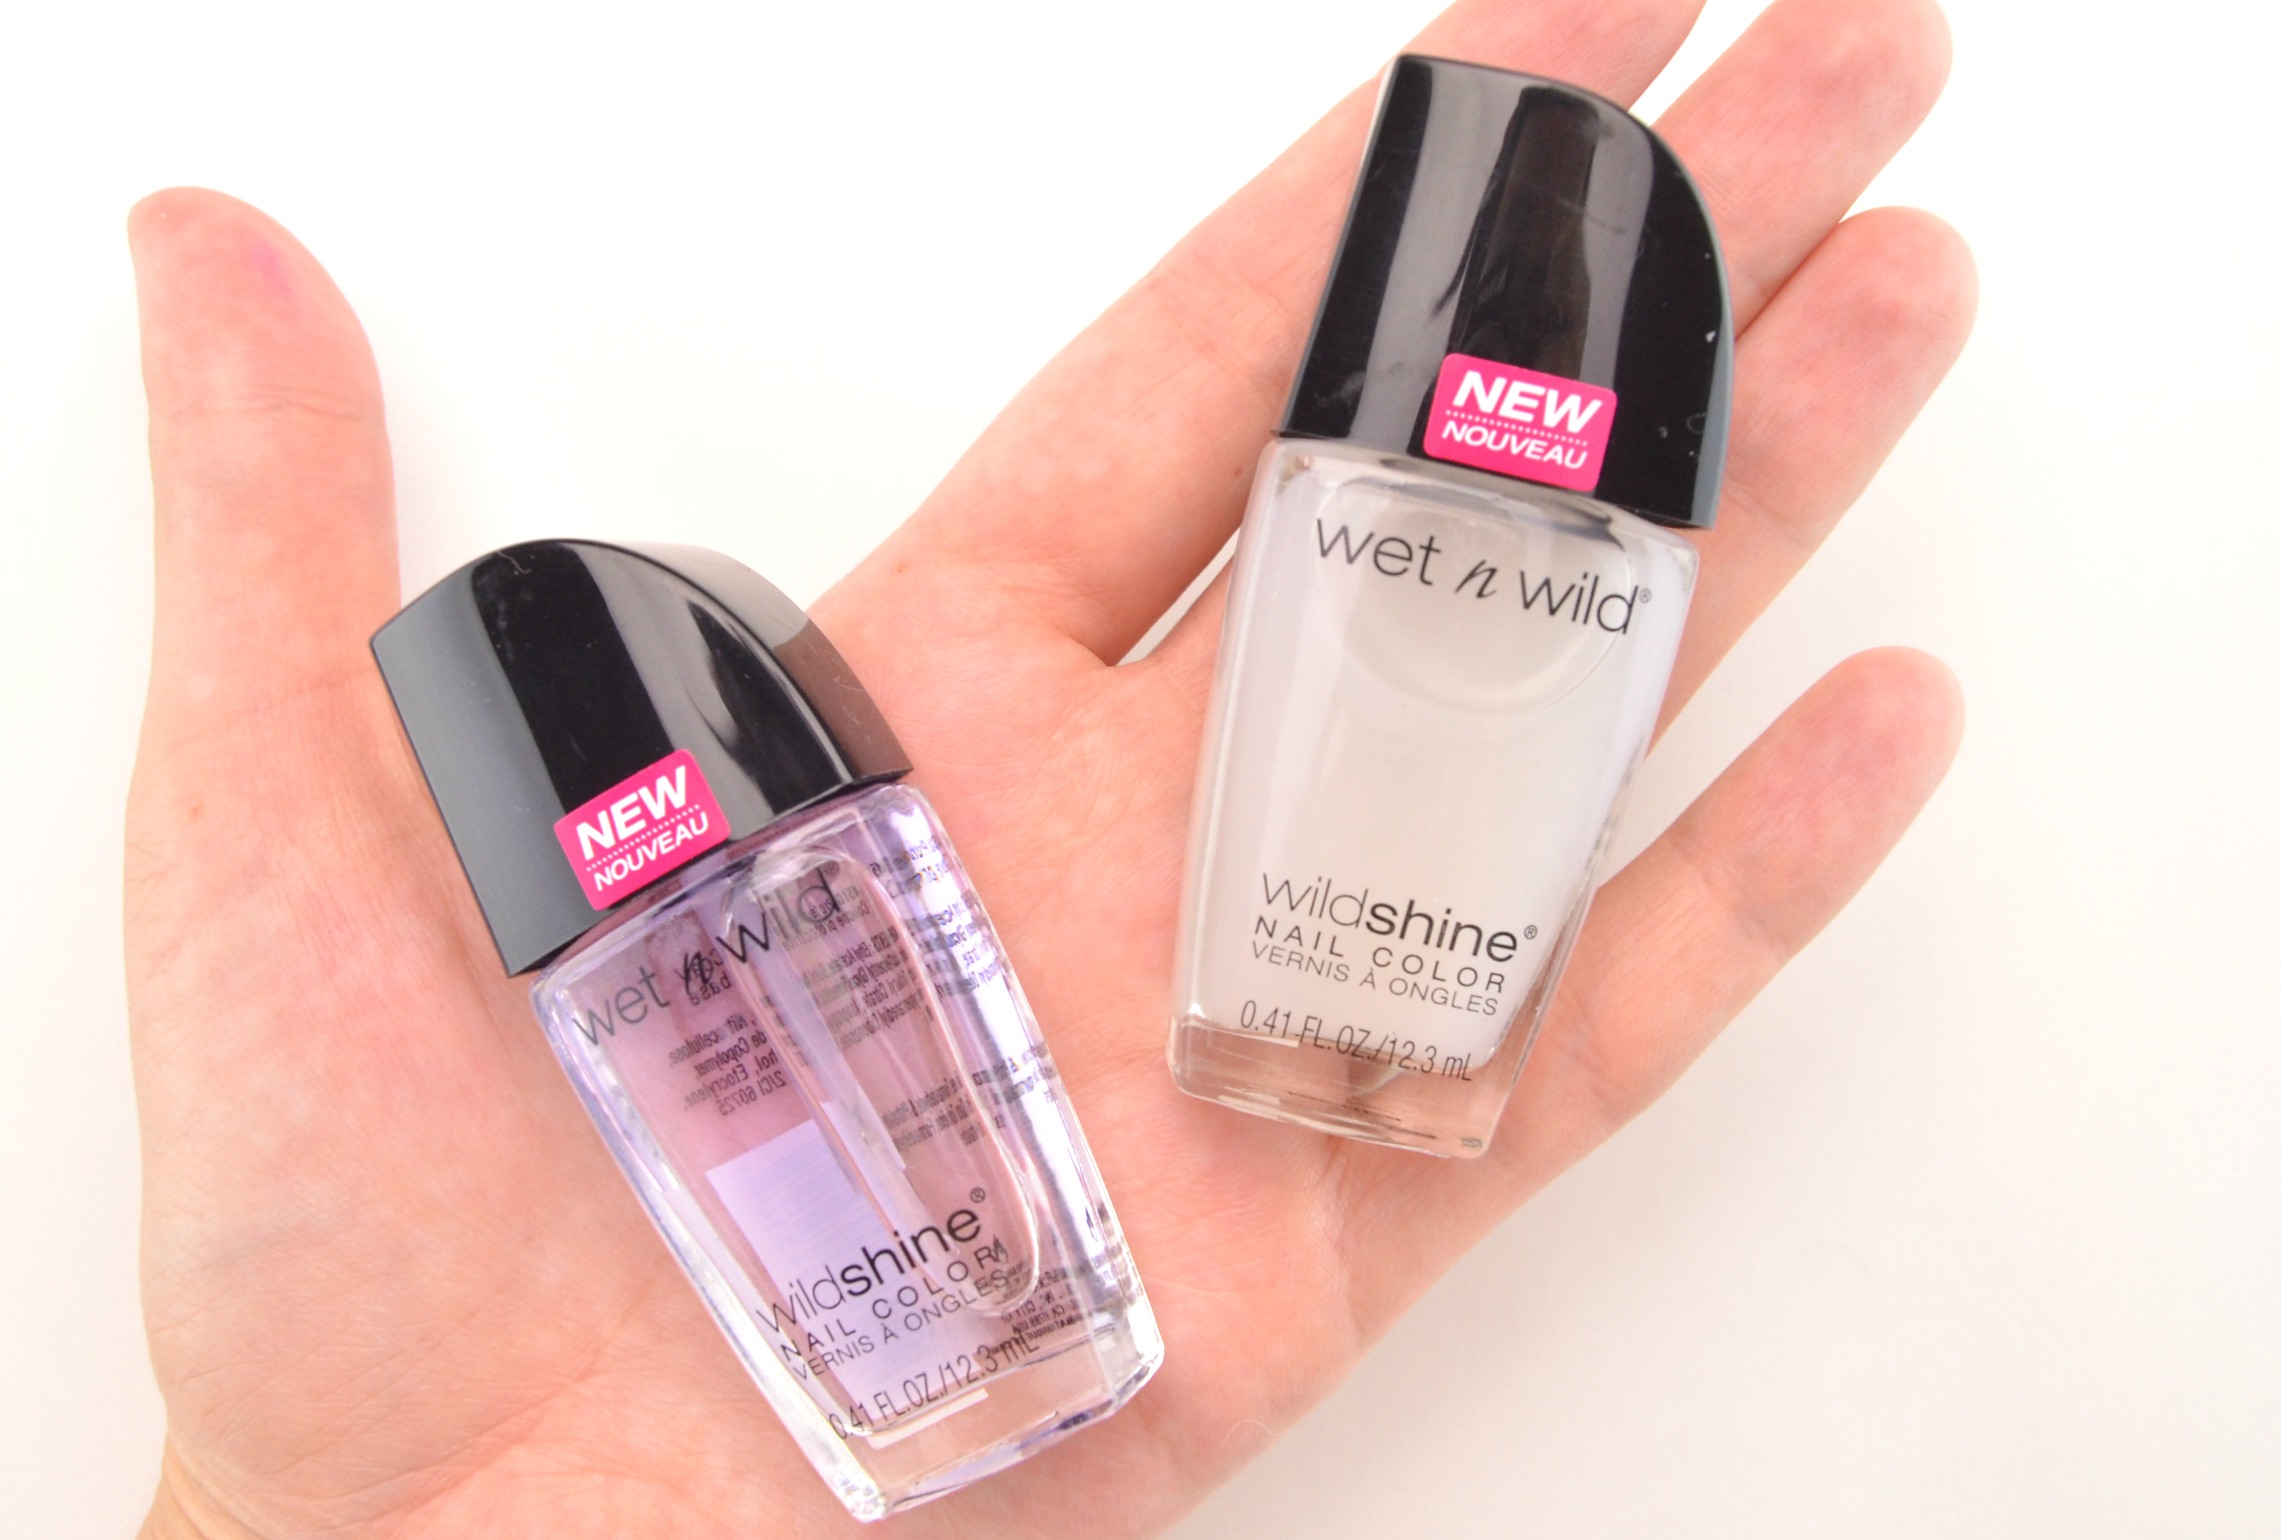 8. Wet n Wild Wild Shine Nail Color - wide 6